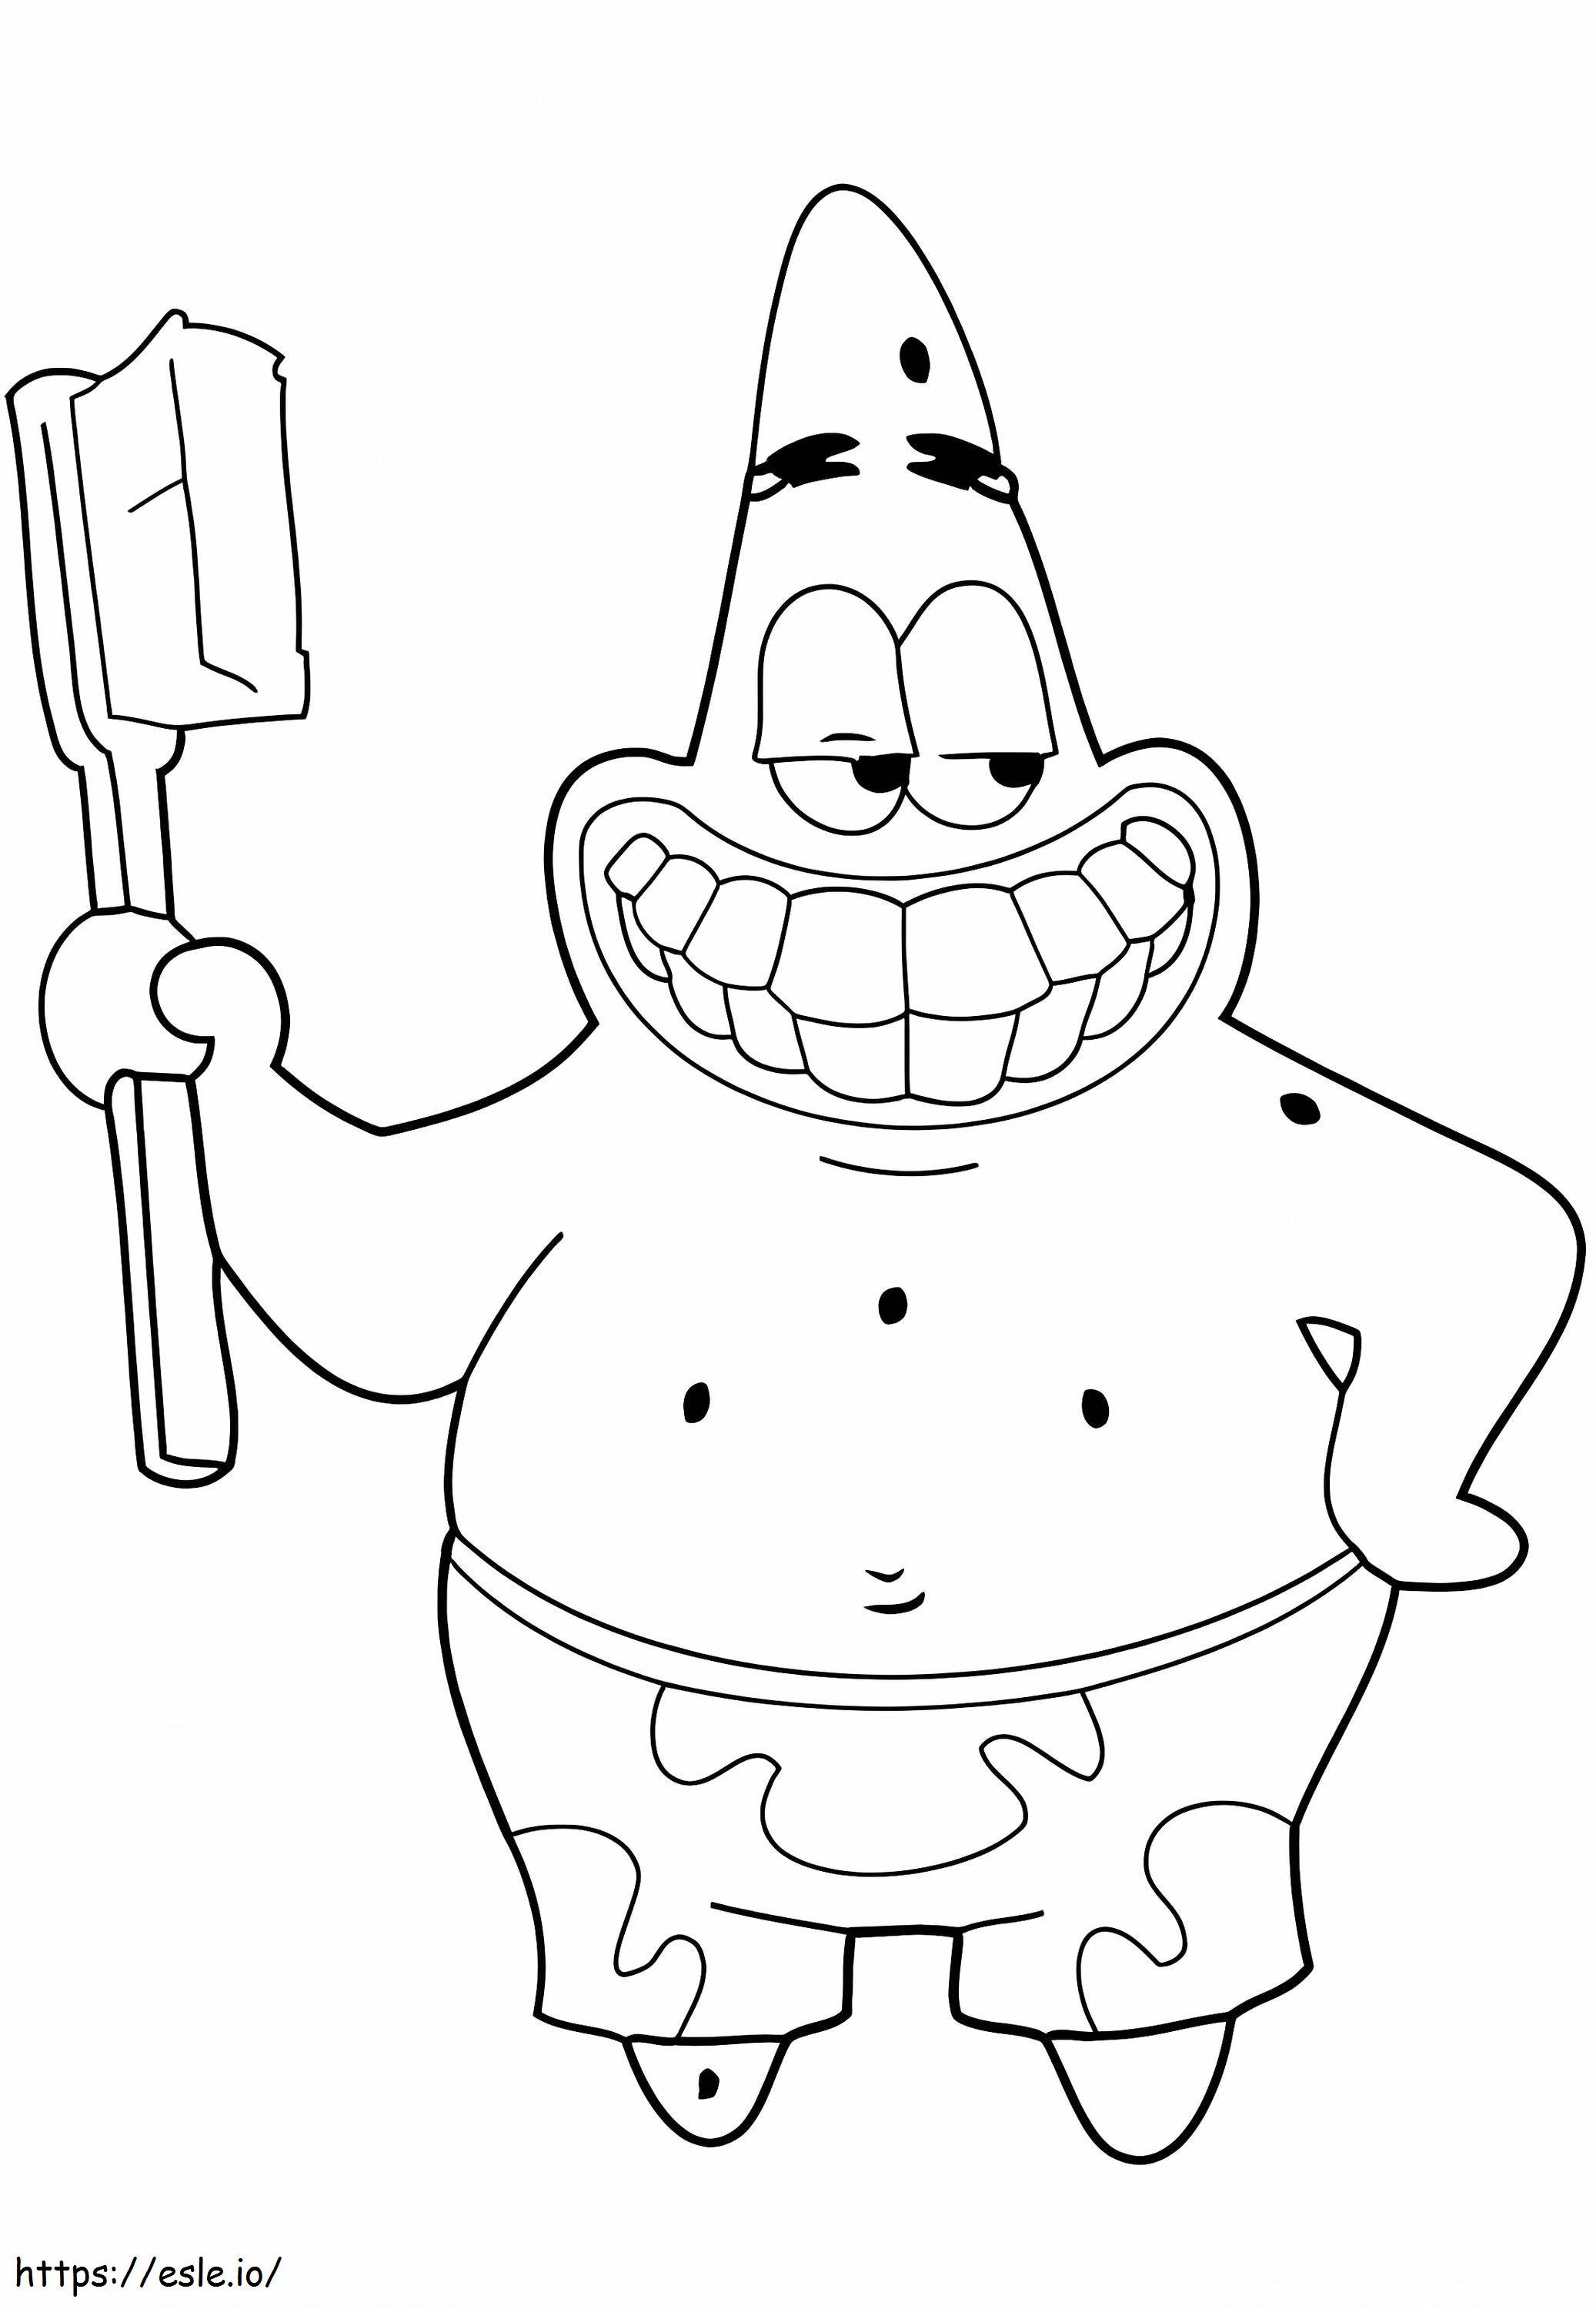 Patrick Star Holding A Toothbrush coloring page